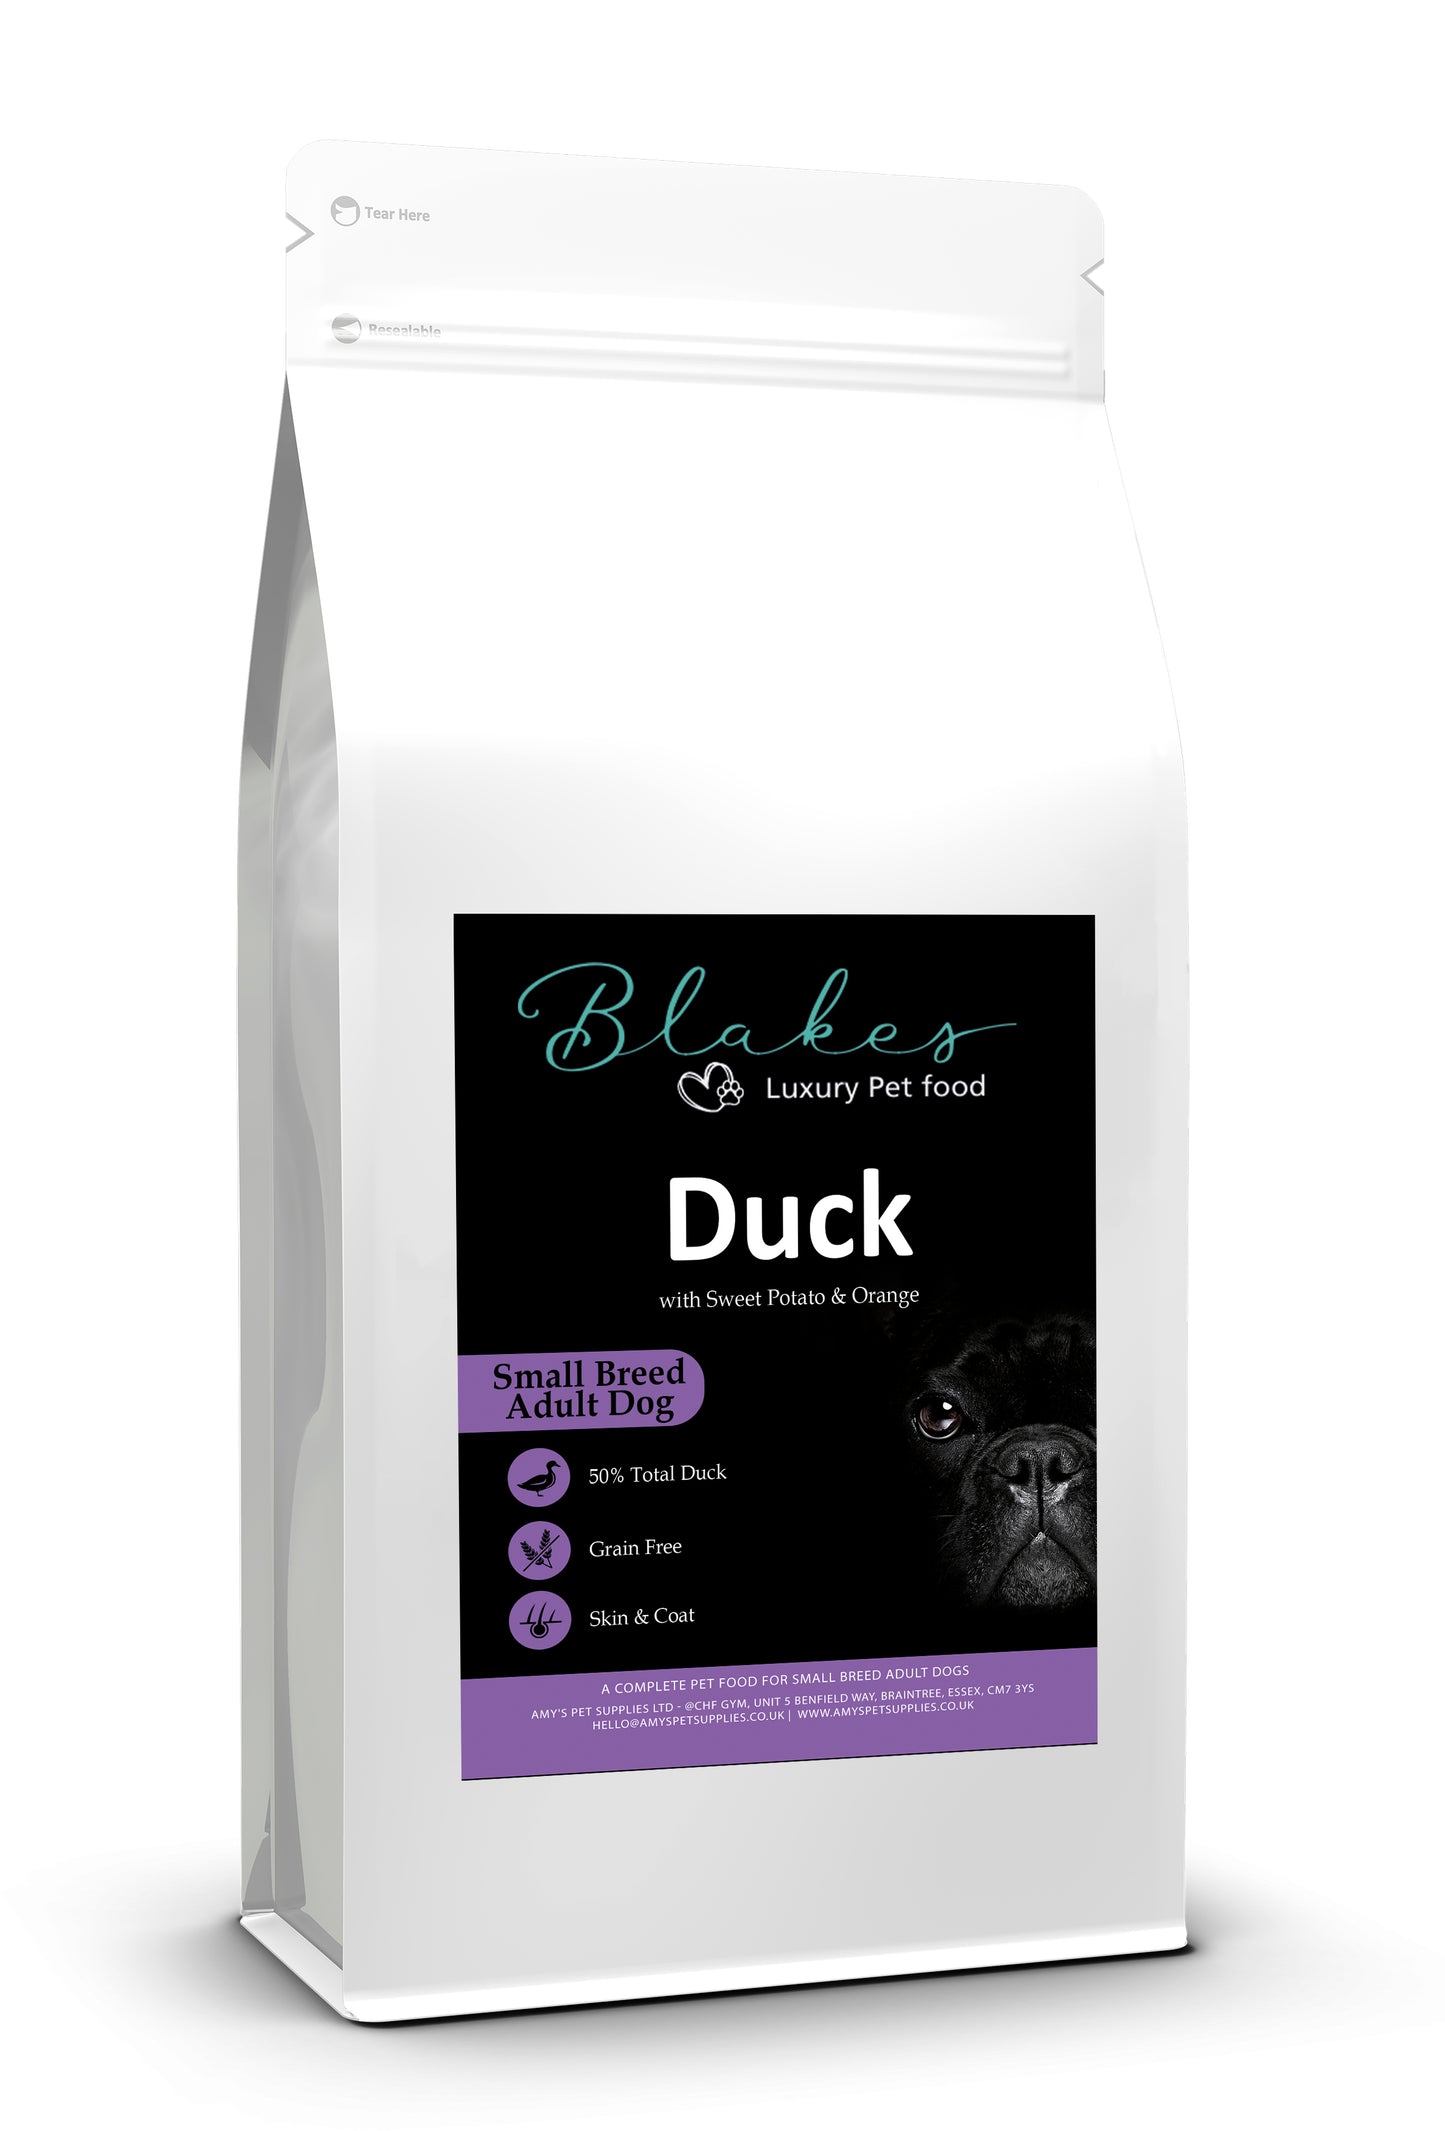 Blakes - Small Breed - Grain Free Complete Dog Food 6KG